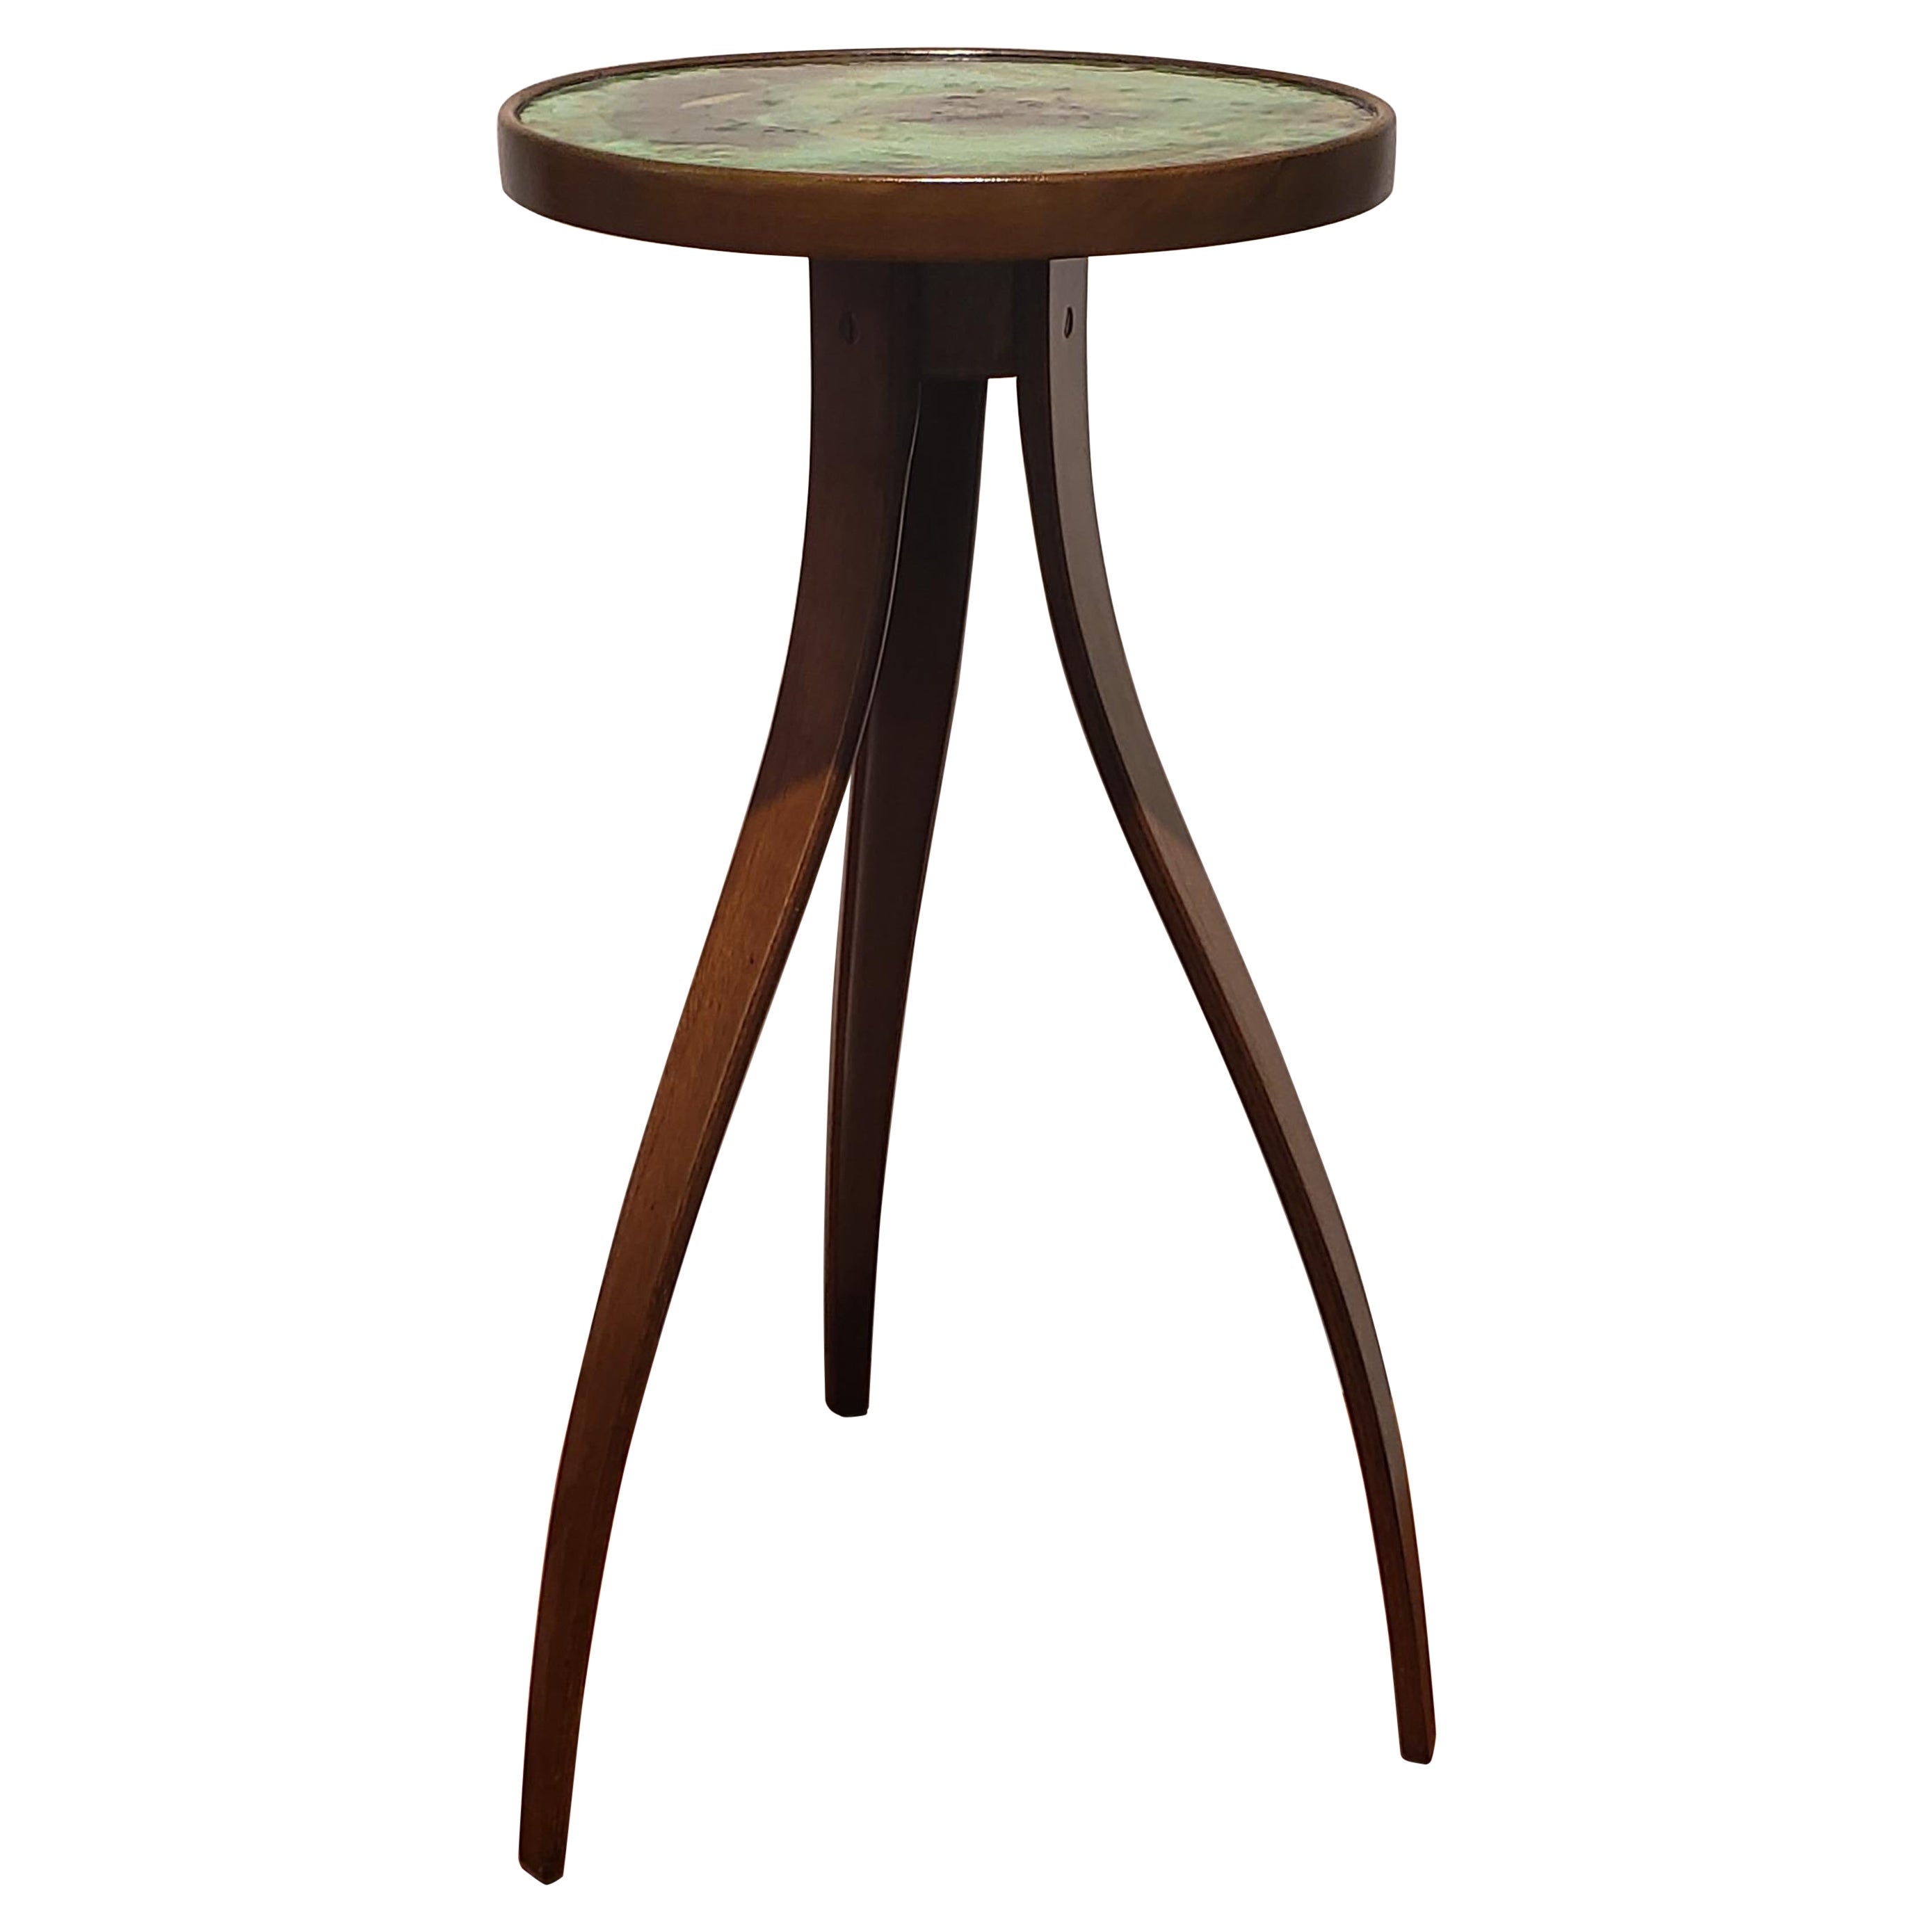 Rare Harvey Probber Mahogany Enamel Copper Round Side Drink Table For Sale